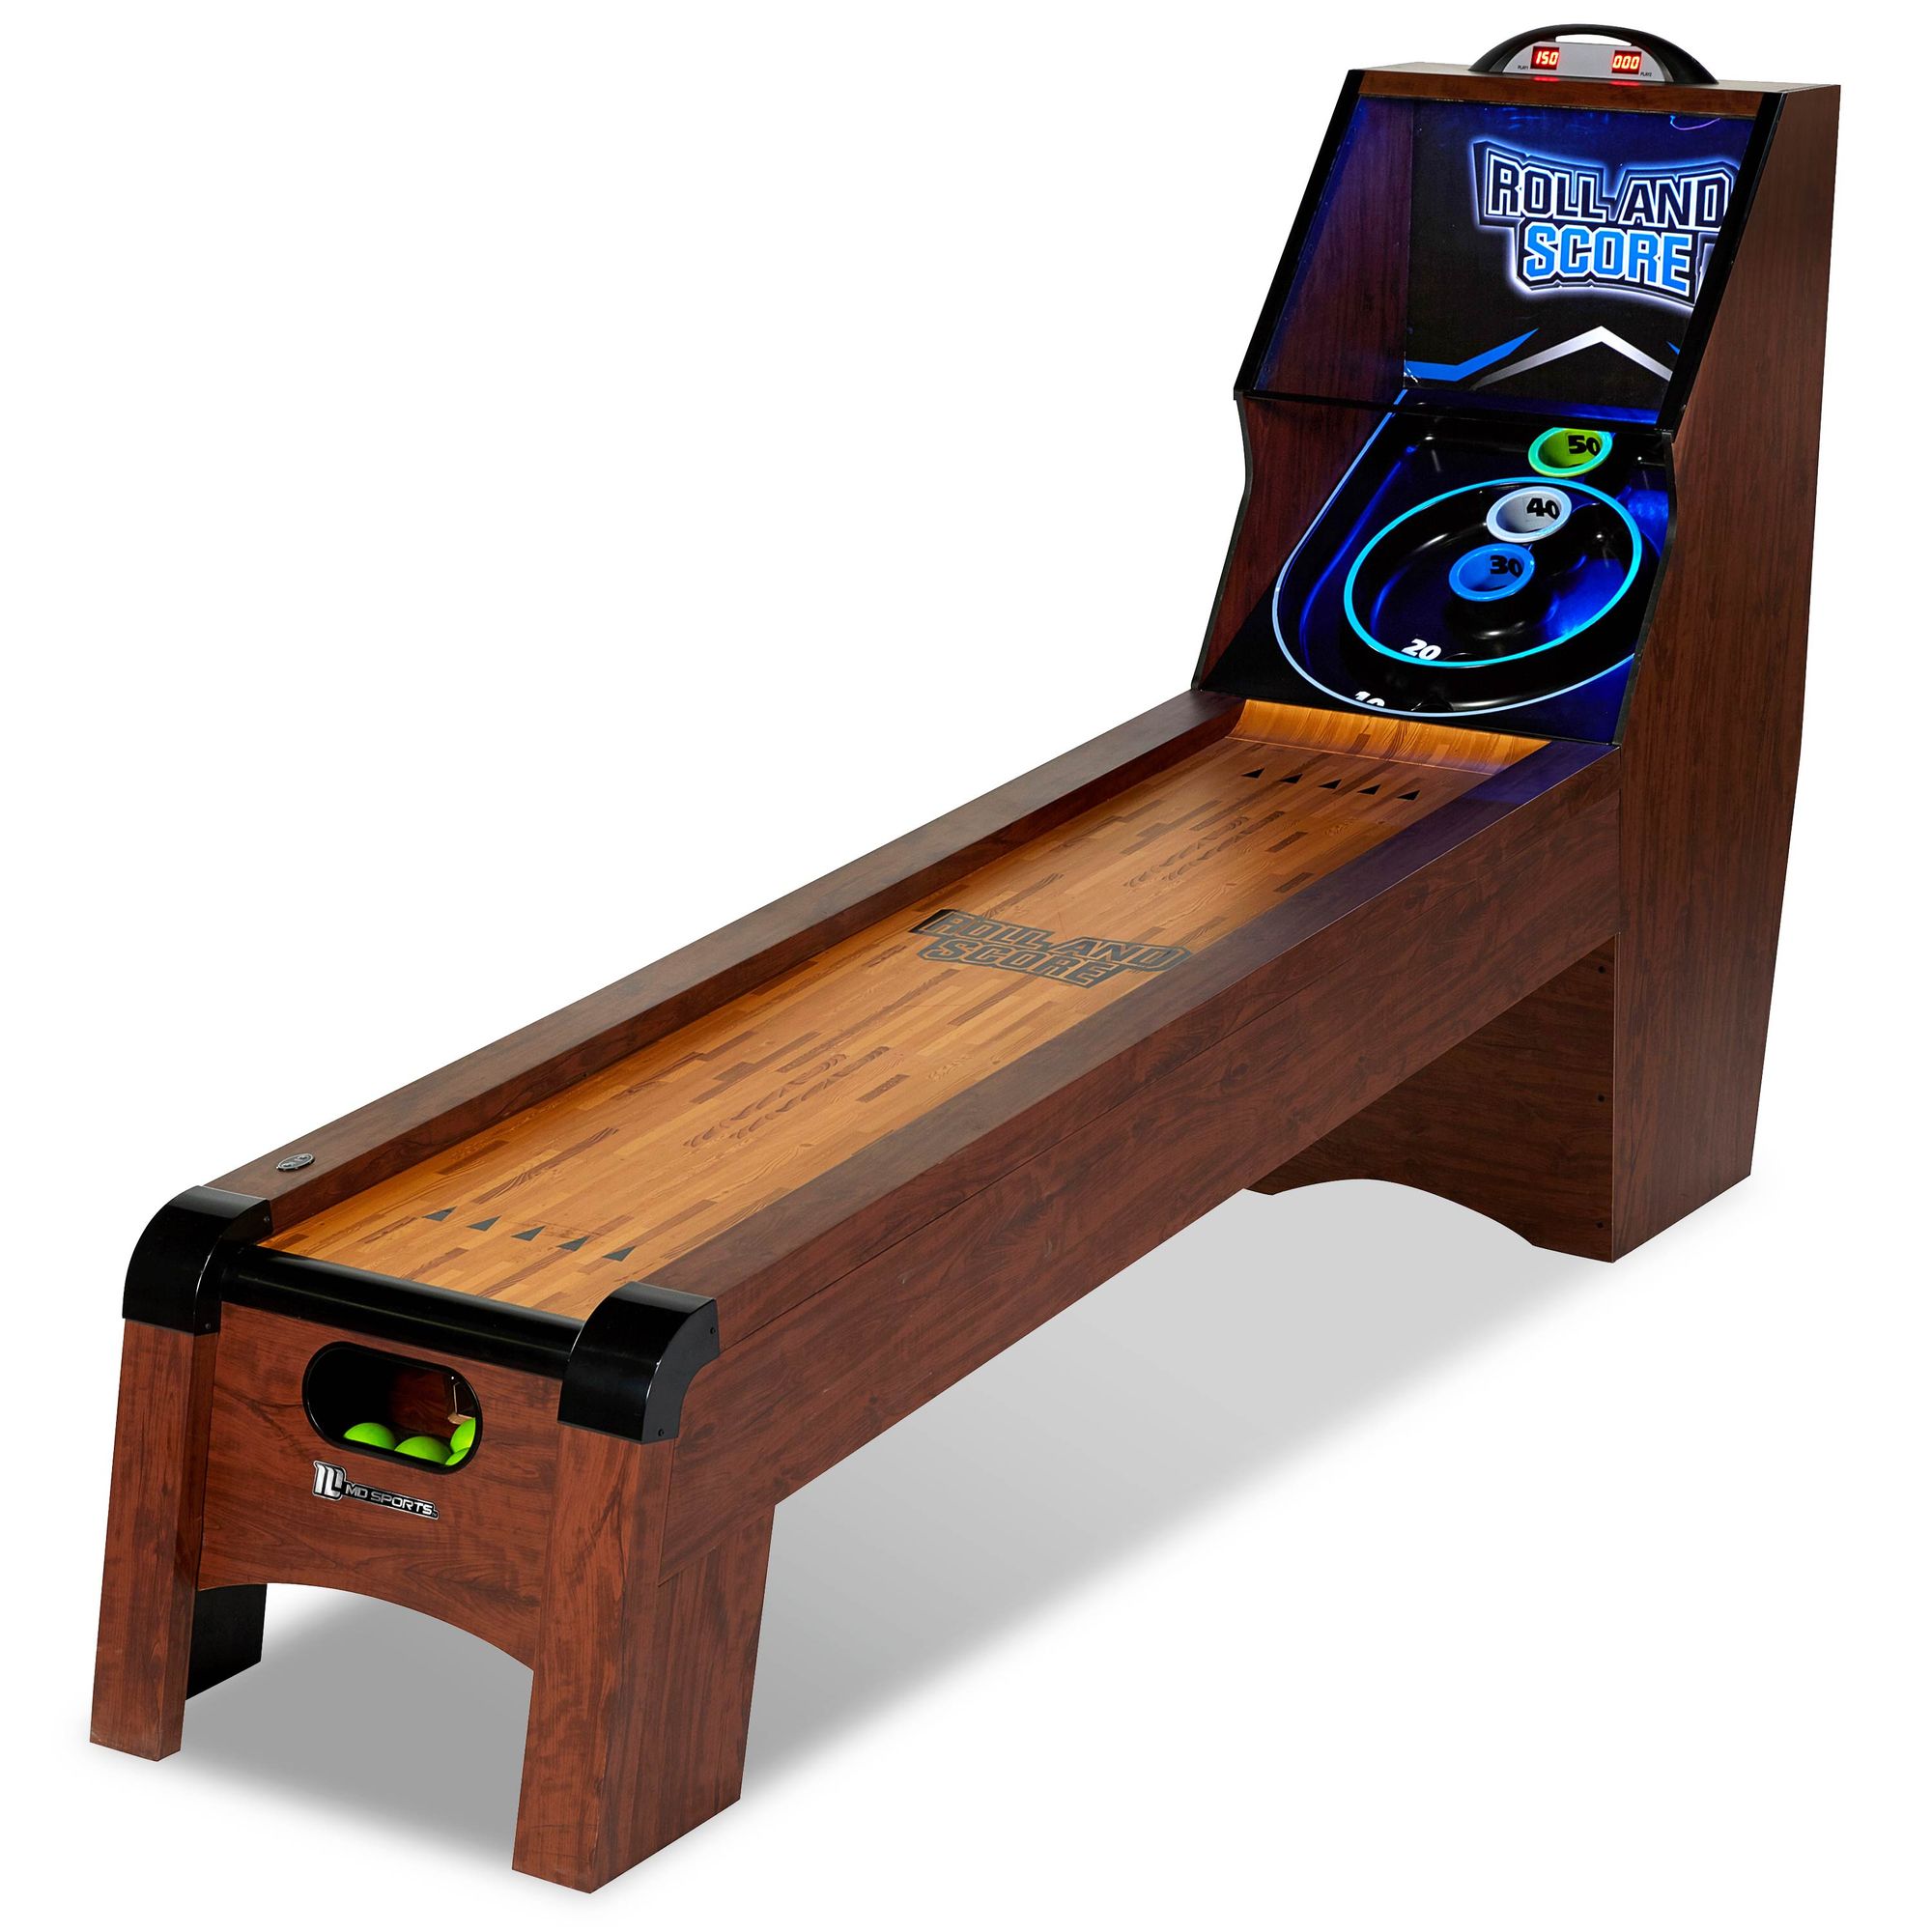 MD Sports 9 Ft. Roll and Score Table, Arcade Game with 4 Skee Ball, LED light